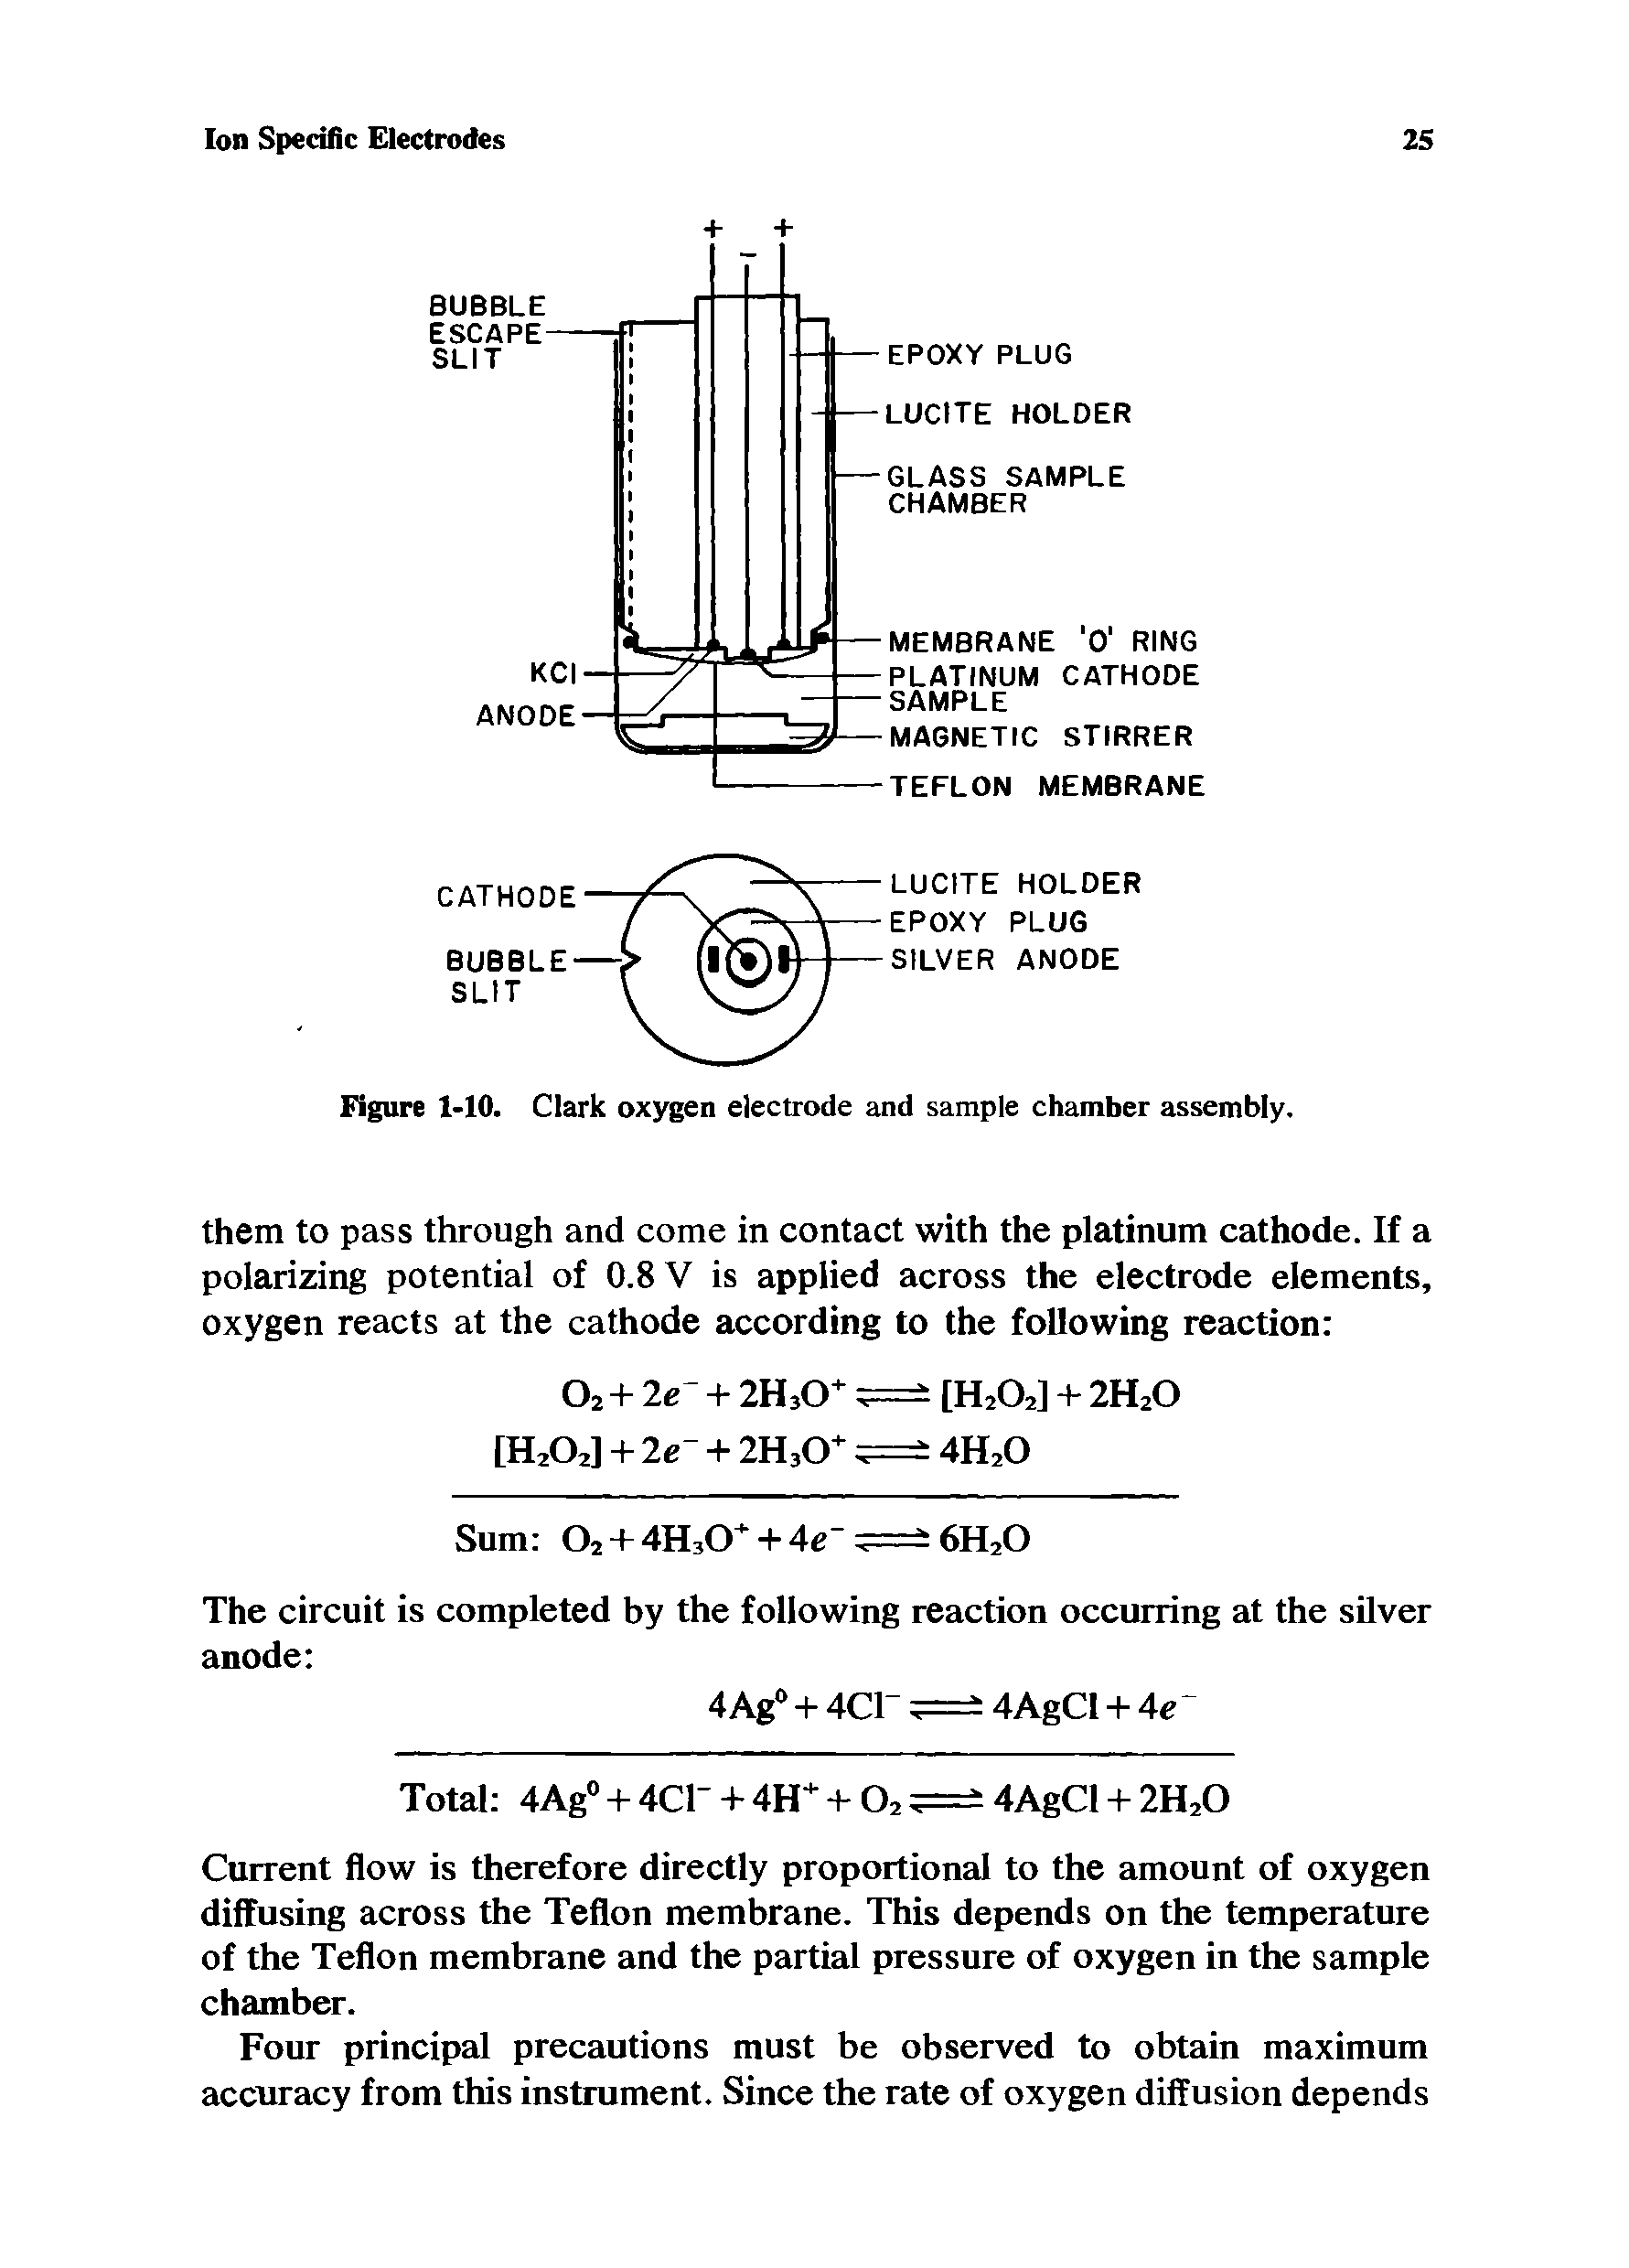 Figure 1-10. Clark oxygen electrode and sample chamber assembly.